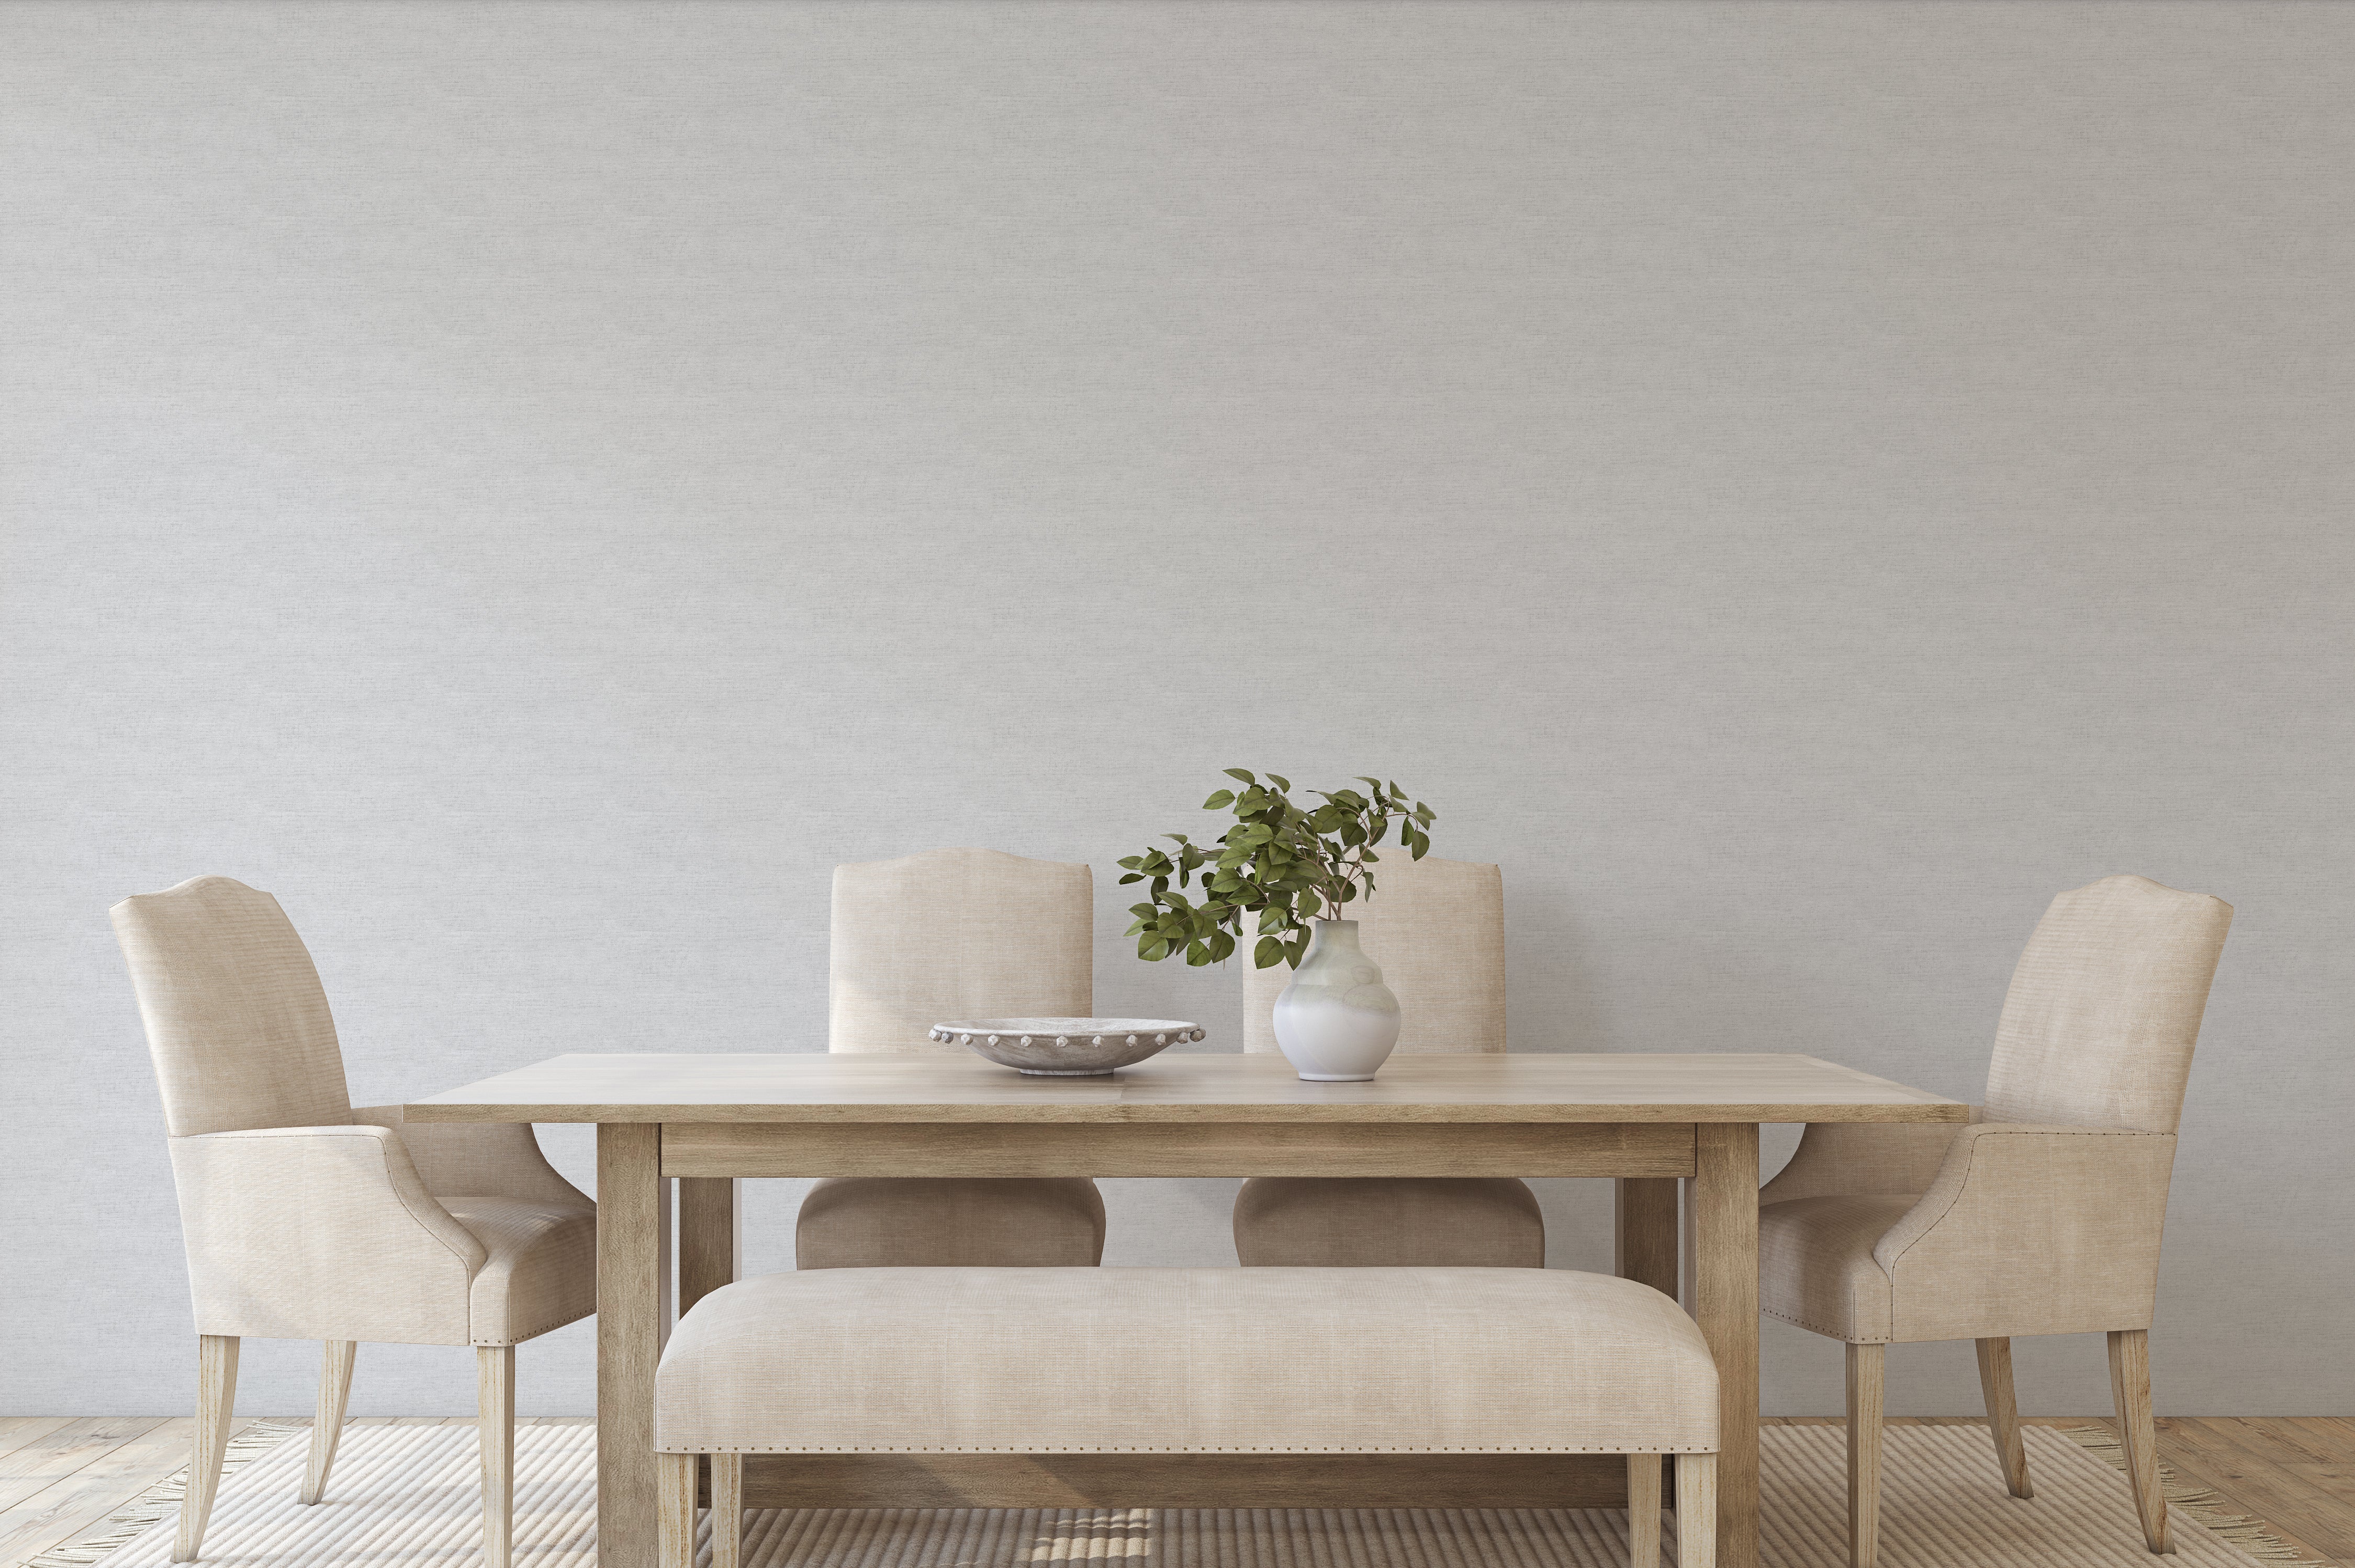 Carefree (Grey) Wallpaper - The Clements Crew Line from WALL BLUSH